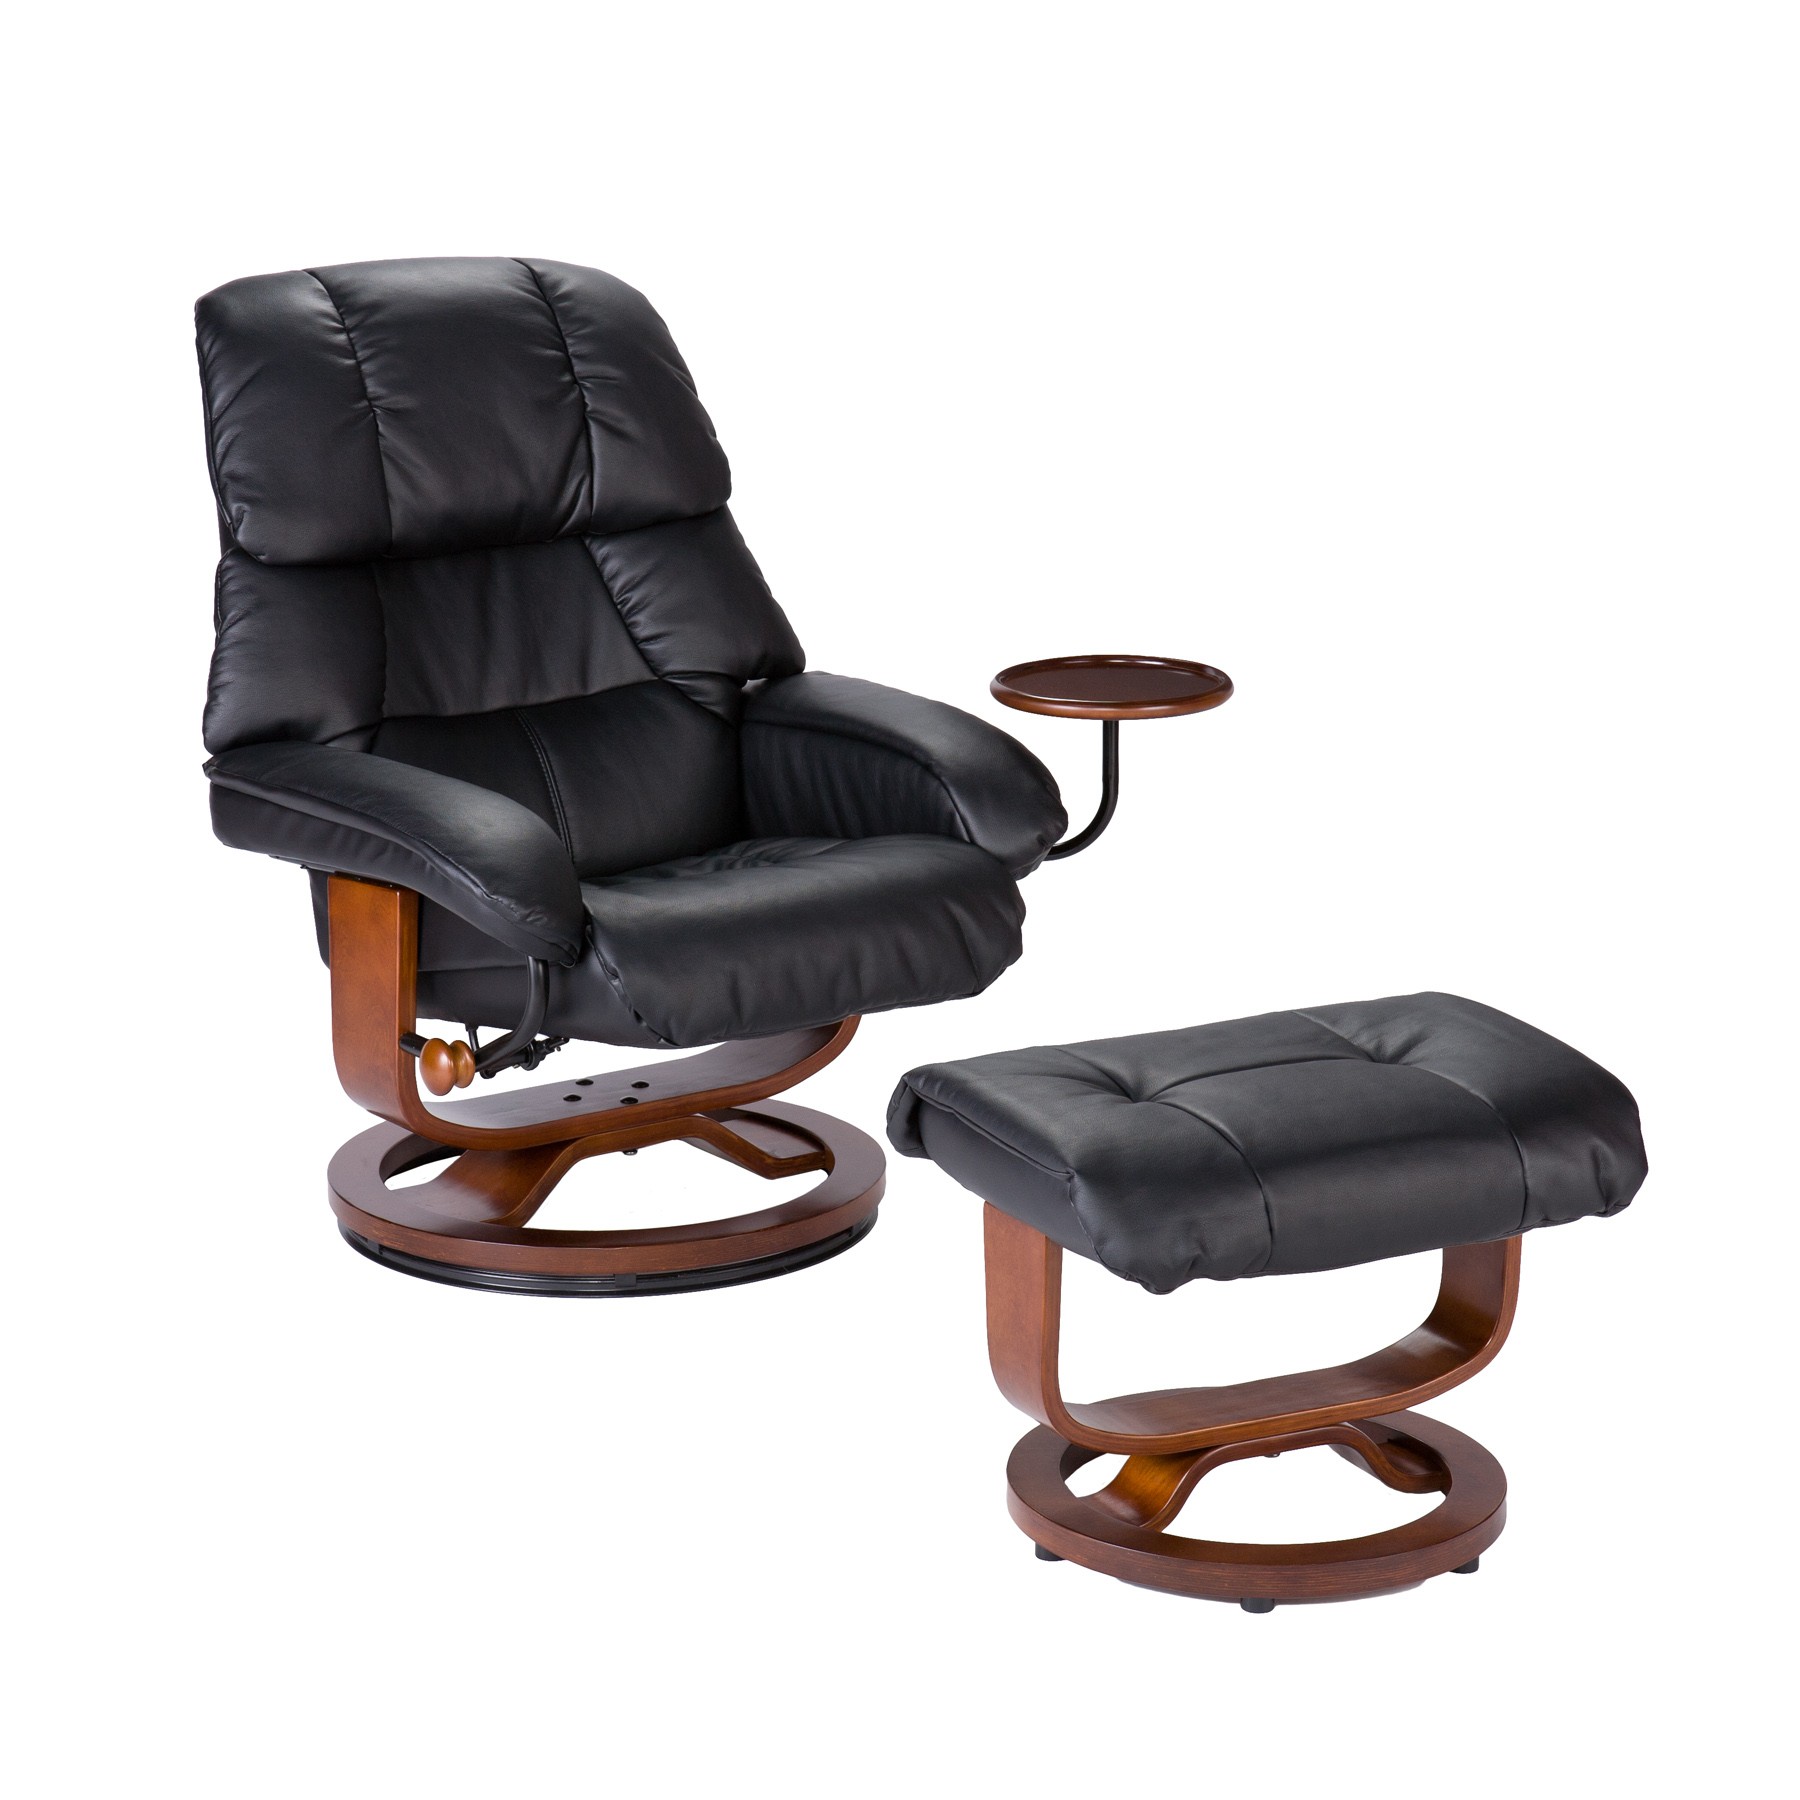 Southern enterprises modern leather recliner and ottoman 3